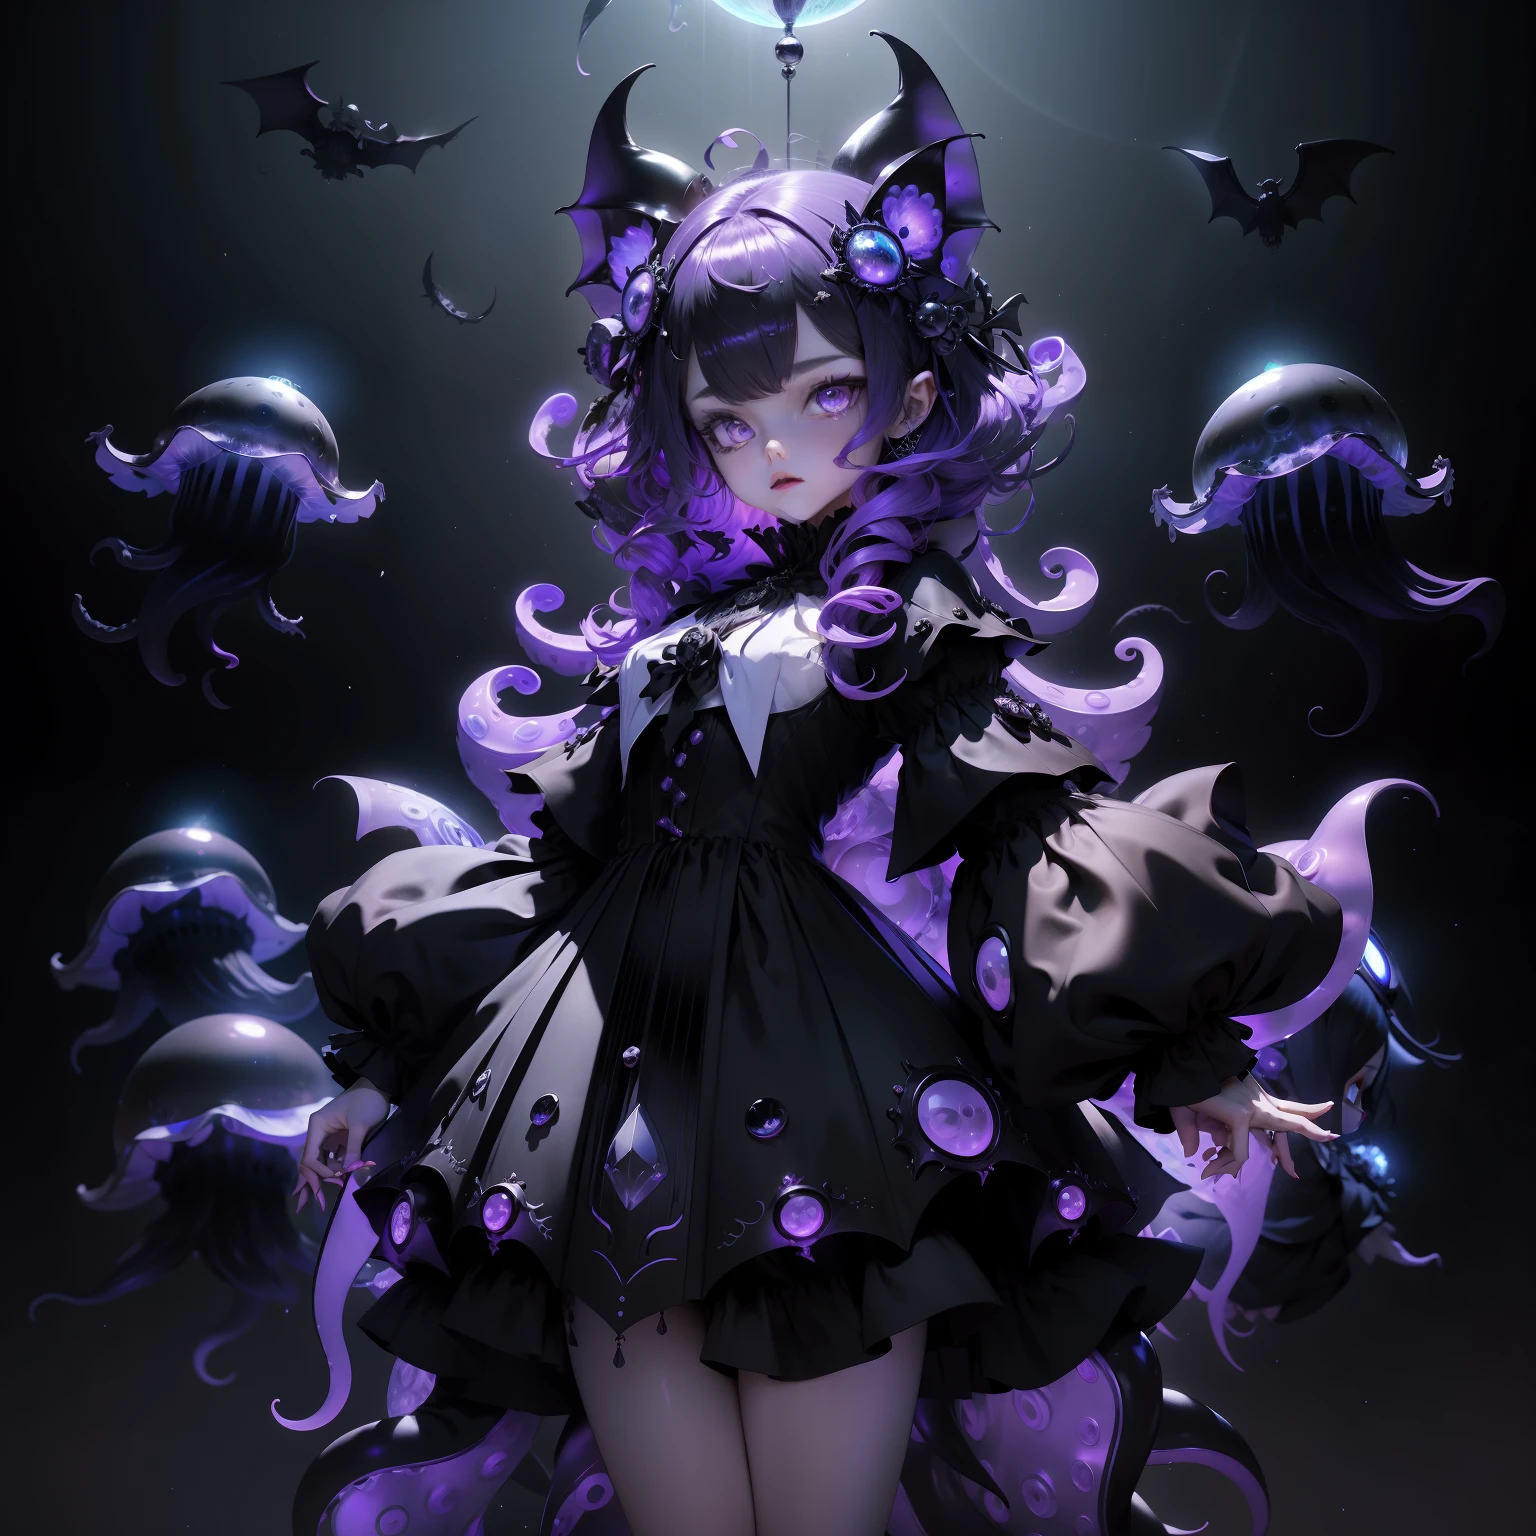 Vampire Squid Girl, black gothic lolita dress, capes, Purple luminous orb on dress, Jellyfish in a skirt, Bat design of the dress, Countless black jellyfish float, Jellyfish with bat wings, Tentacles from the skirt, One big black jellyfish overhead, nigh sky, fullmoon, Cat ear hair ornament on her head, Two shiny balls hair ornament on her head, Armor Ring,